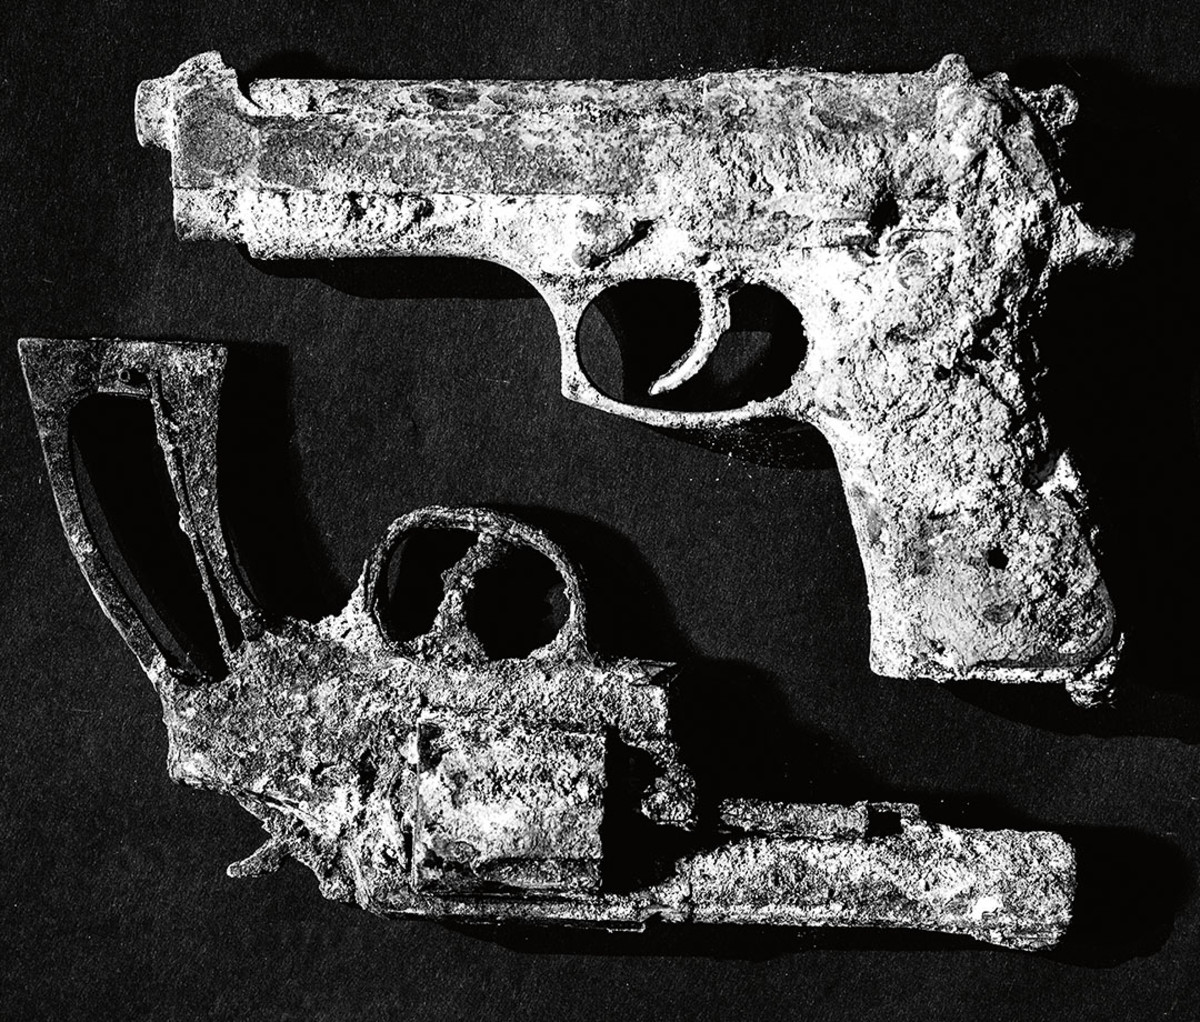 The burned weapons he used for movie work.